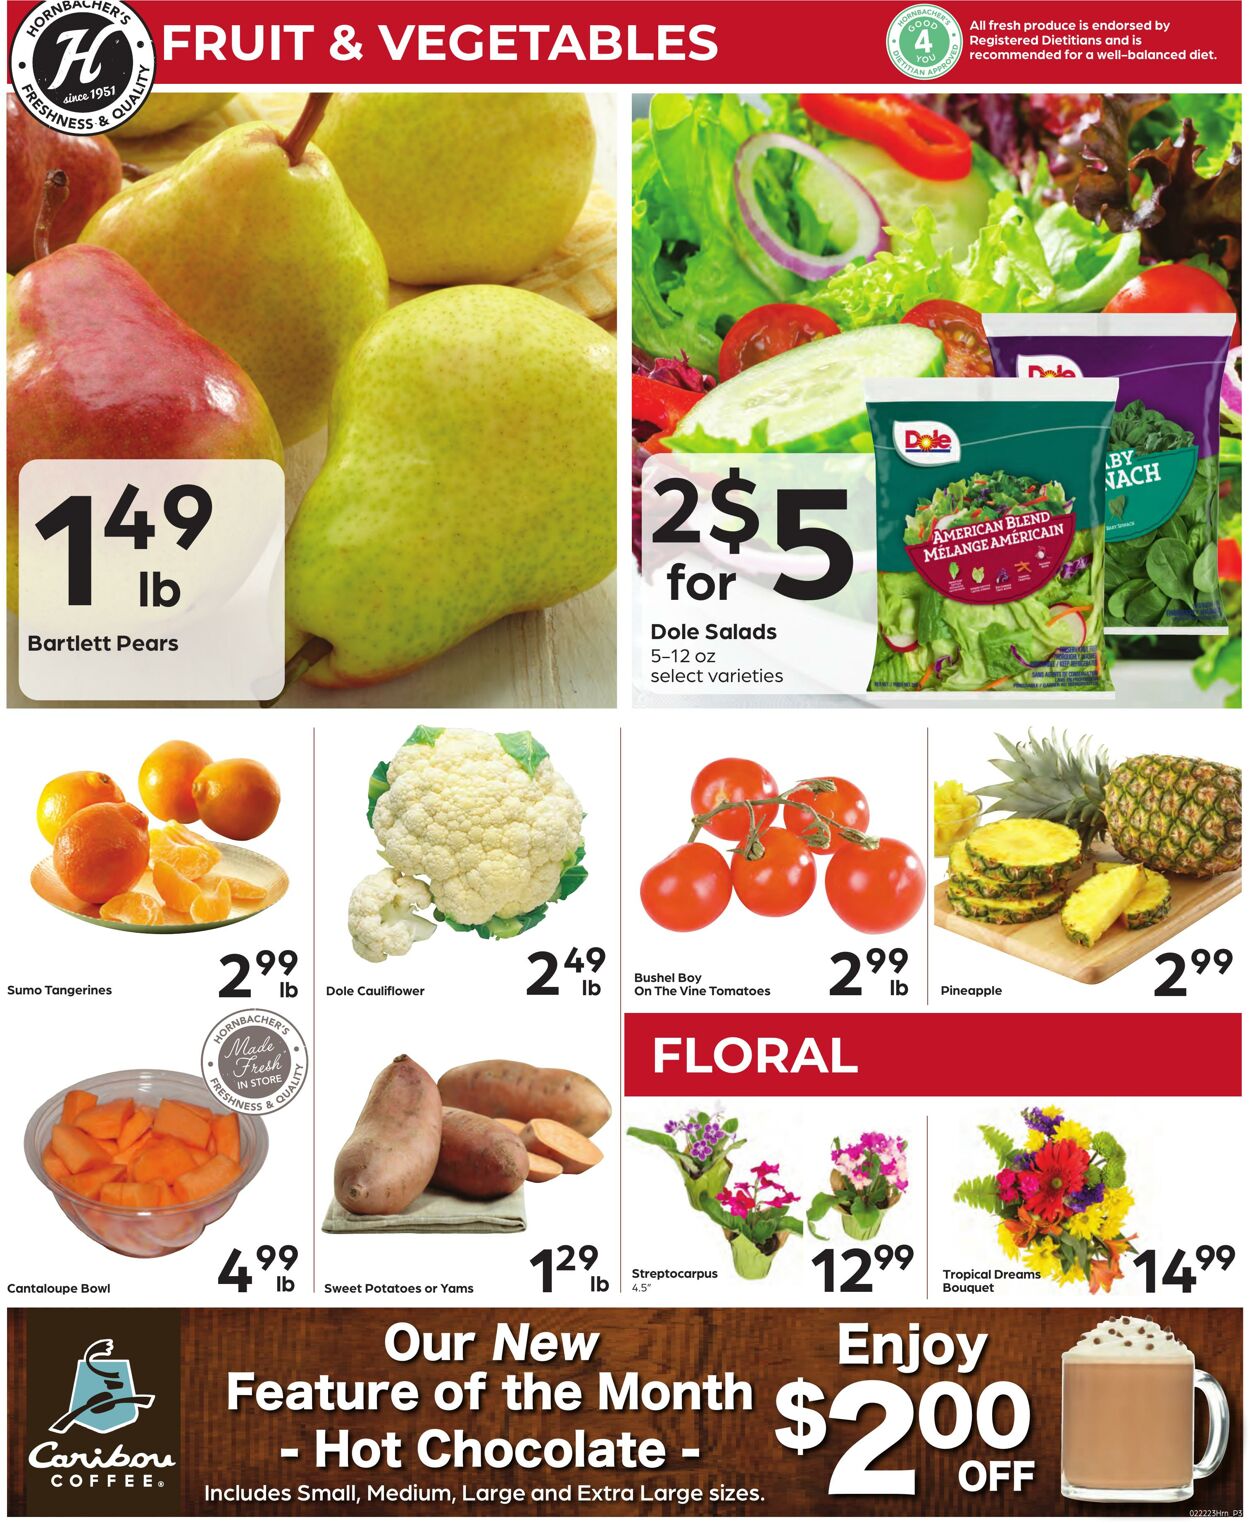 Weekly ad Hornbacher's 02/22/2023 - 02/28/2023